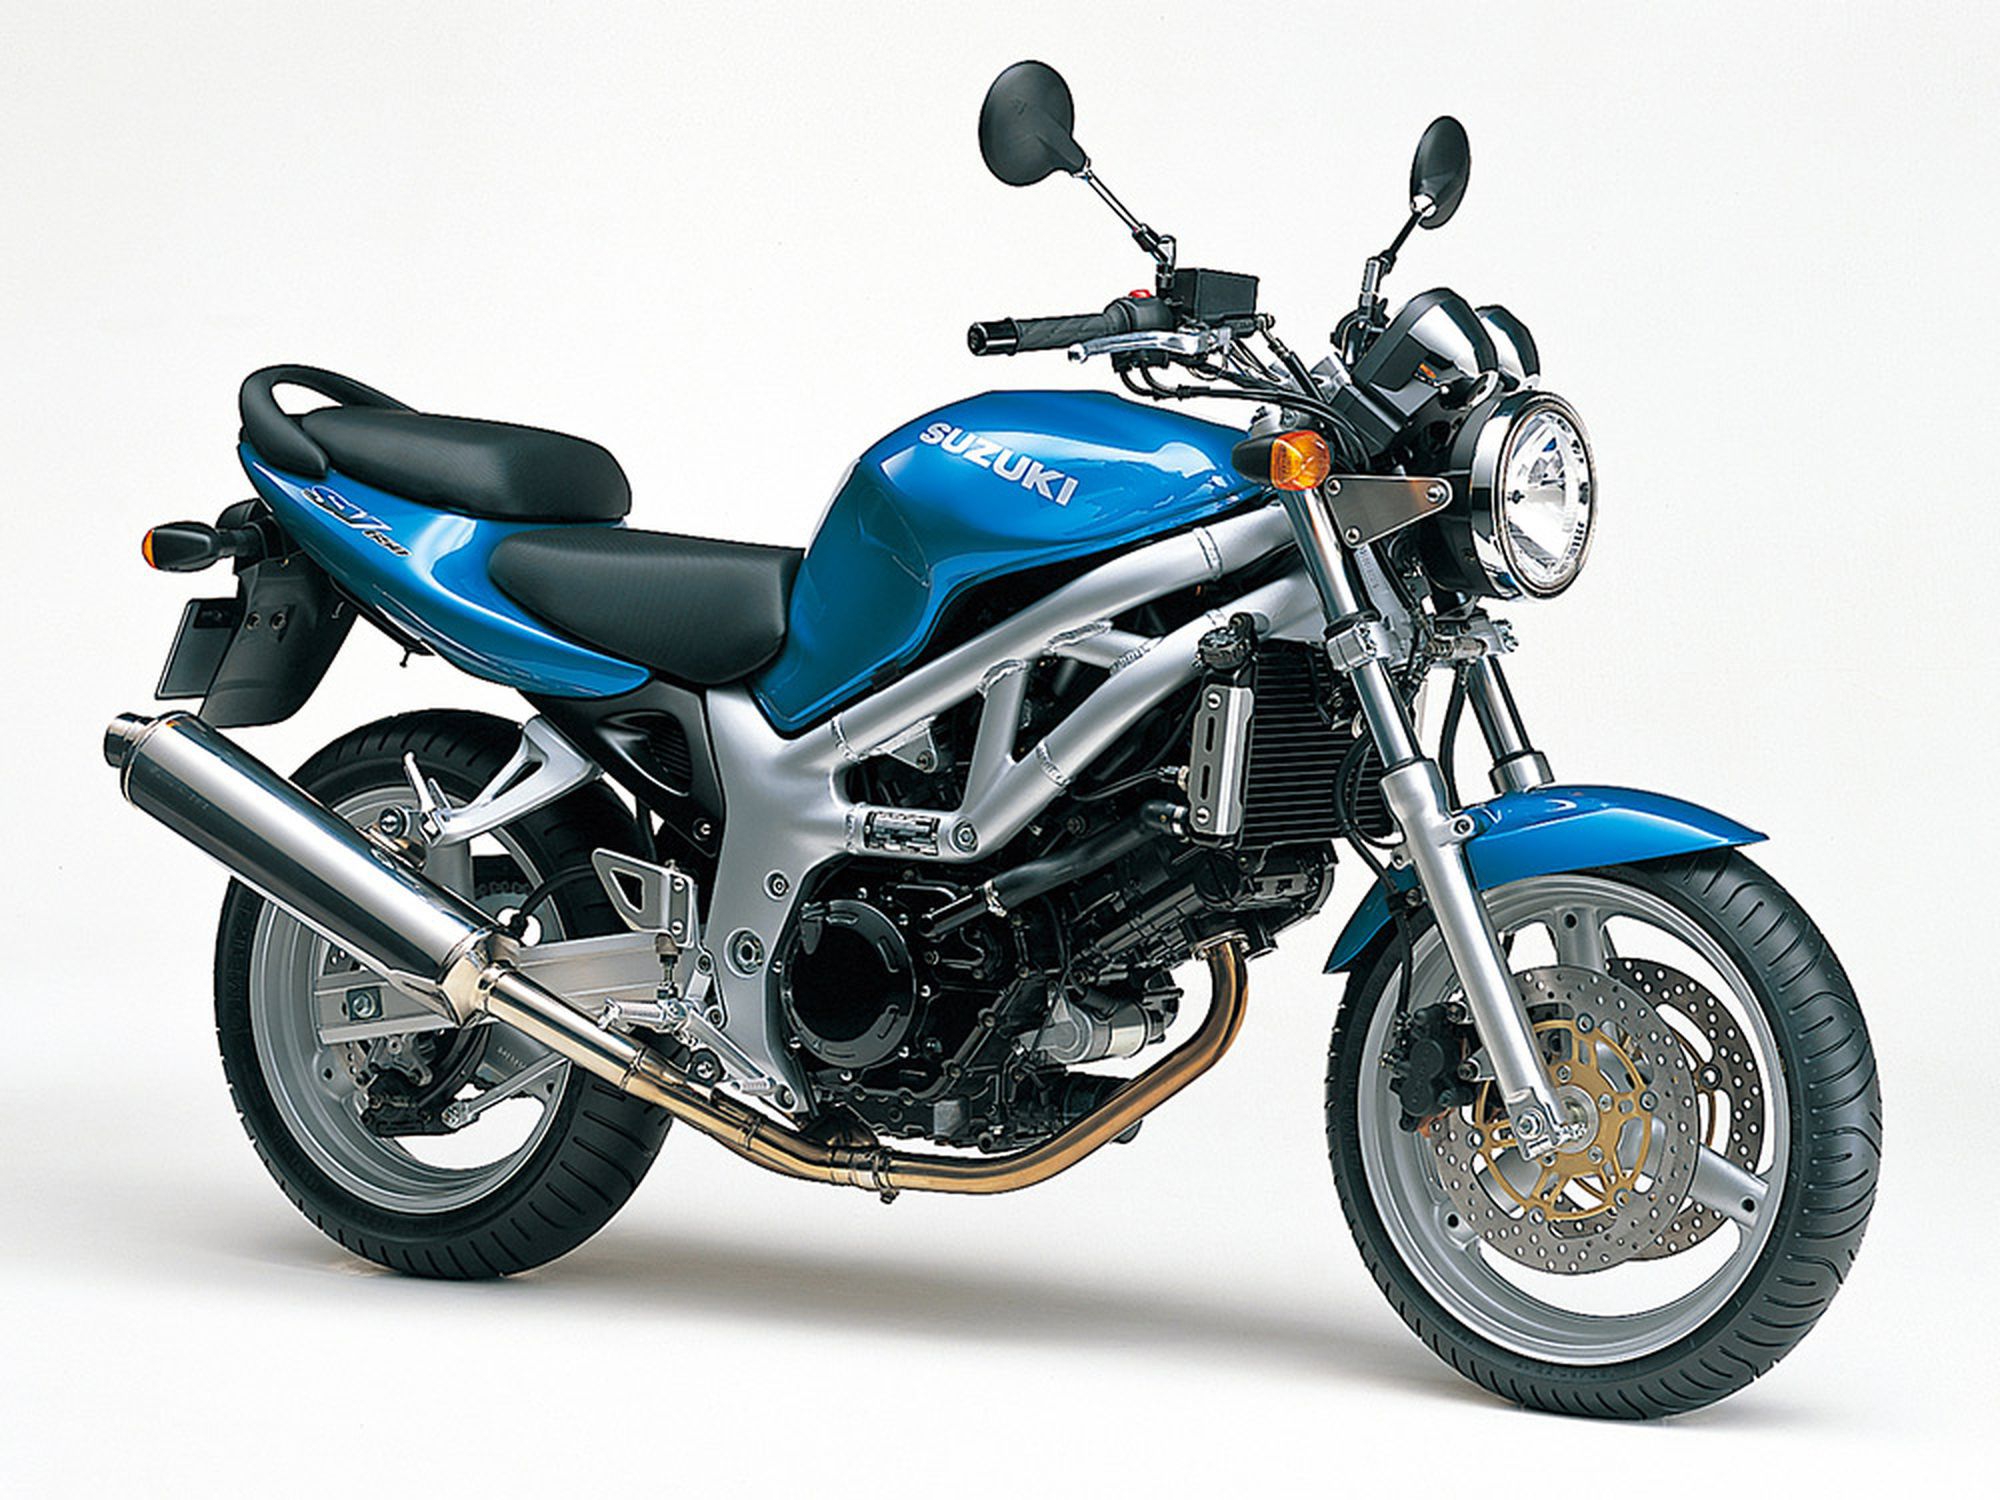 At one point the demand for SV650 motorcycles far outweighed the supply for these fantastic track bikes. As a result, many of them found their way to the garbage bin after serving time as beginner trackday bikes and racebikes. Their combination of user friendly V-twin power and comfortable ergos was only rivaled by their low price point and bountiful aftermarket products.